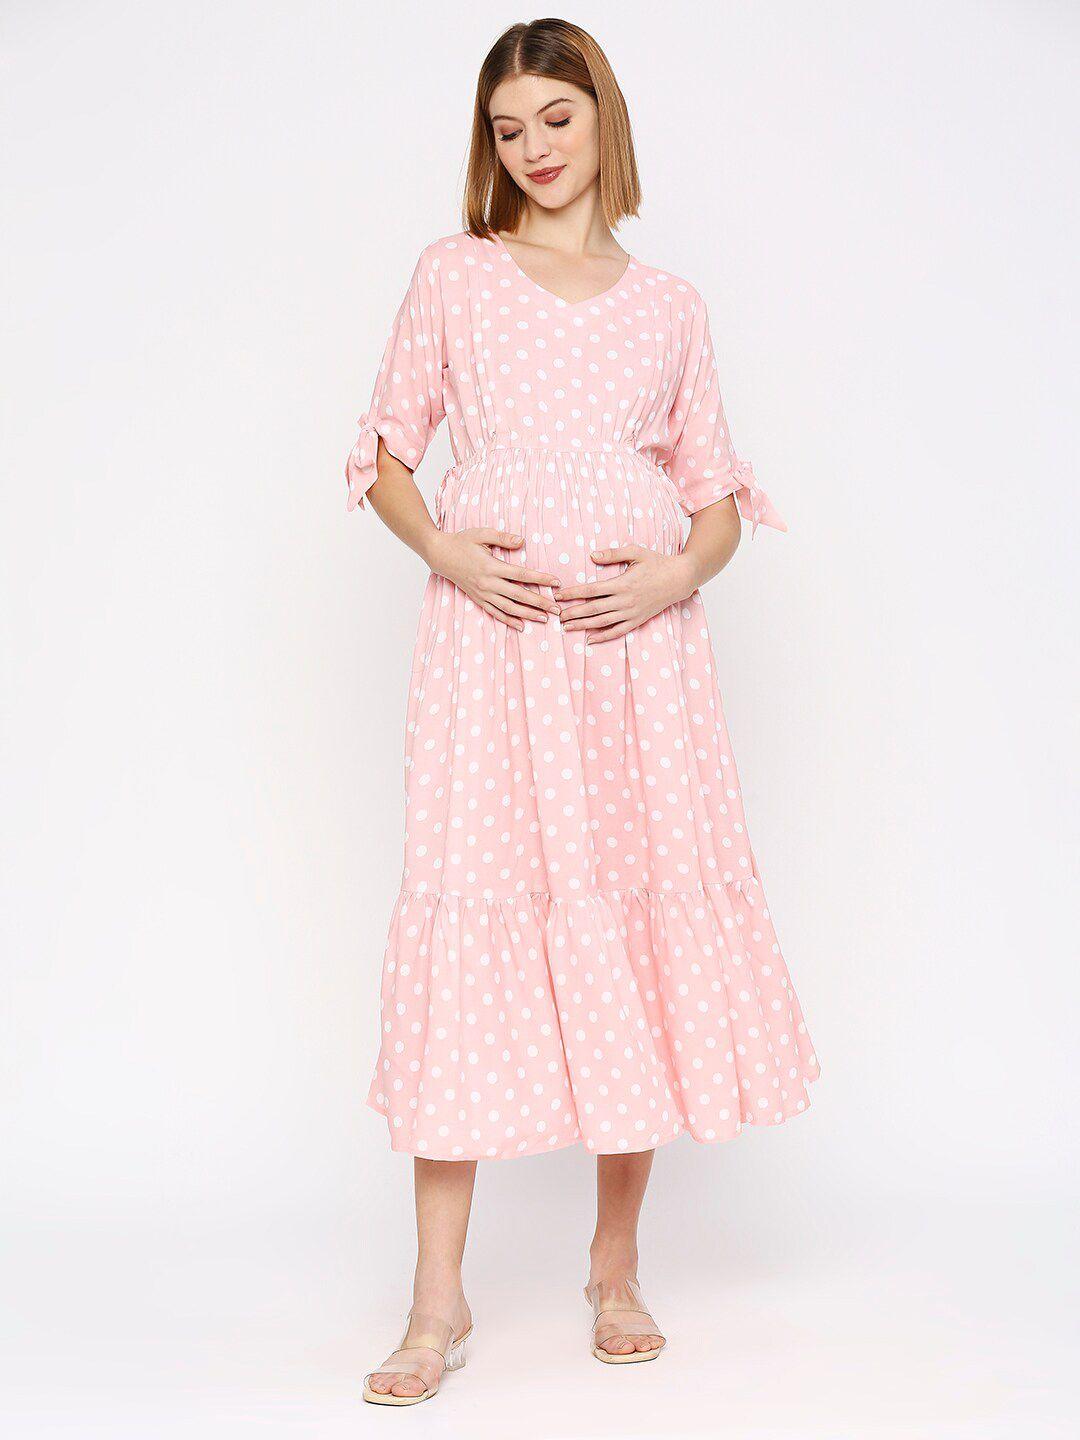 meemee polka dot printed fit & flare cotton maternity dress